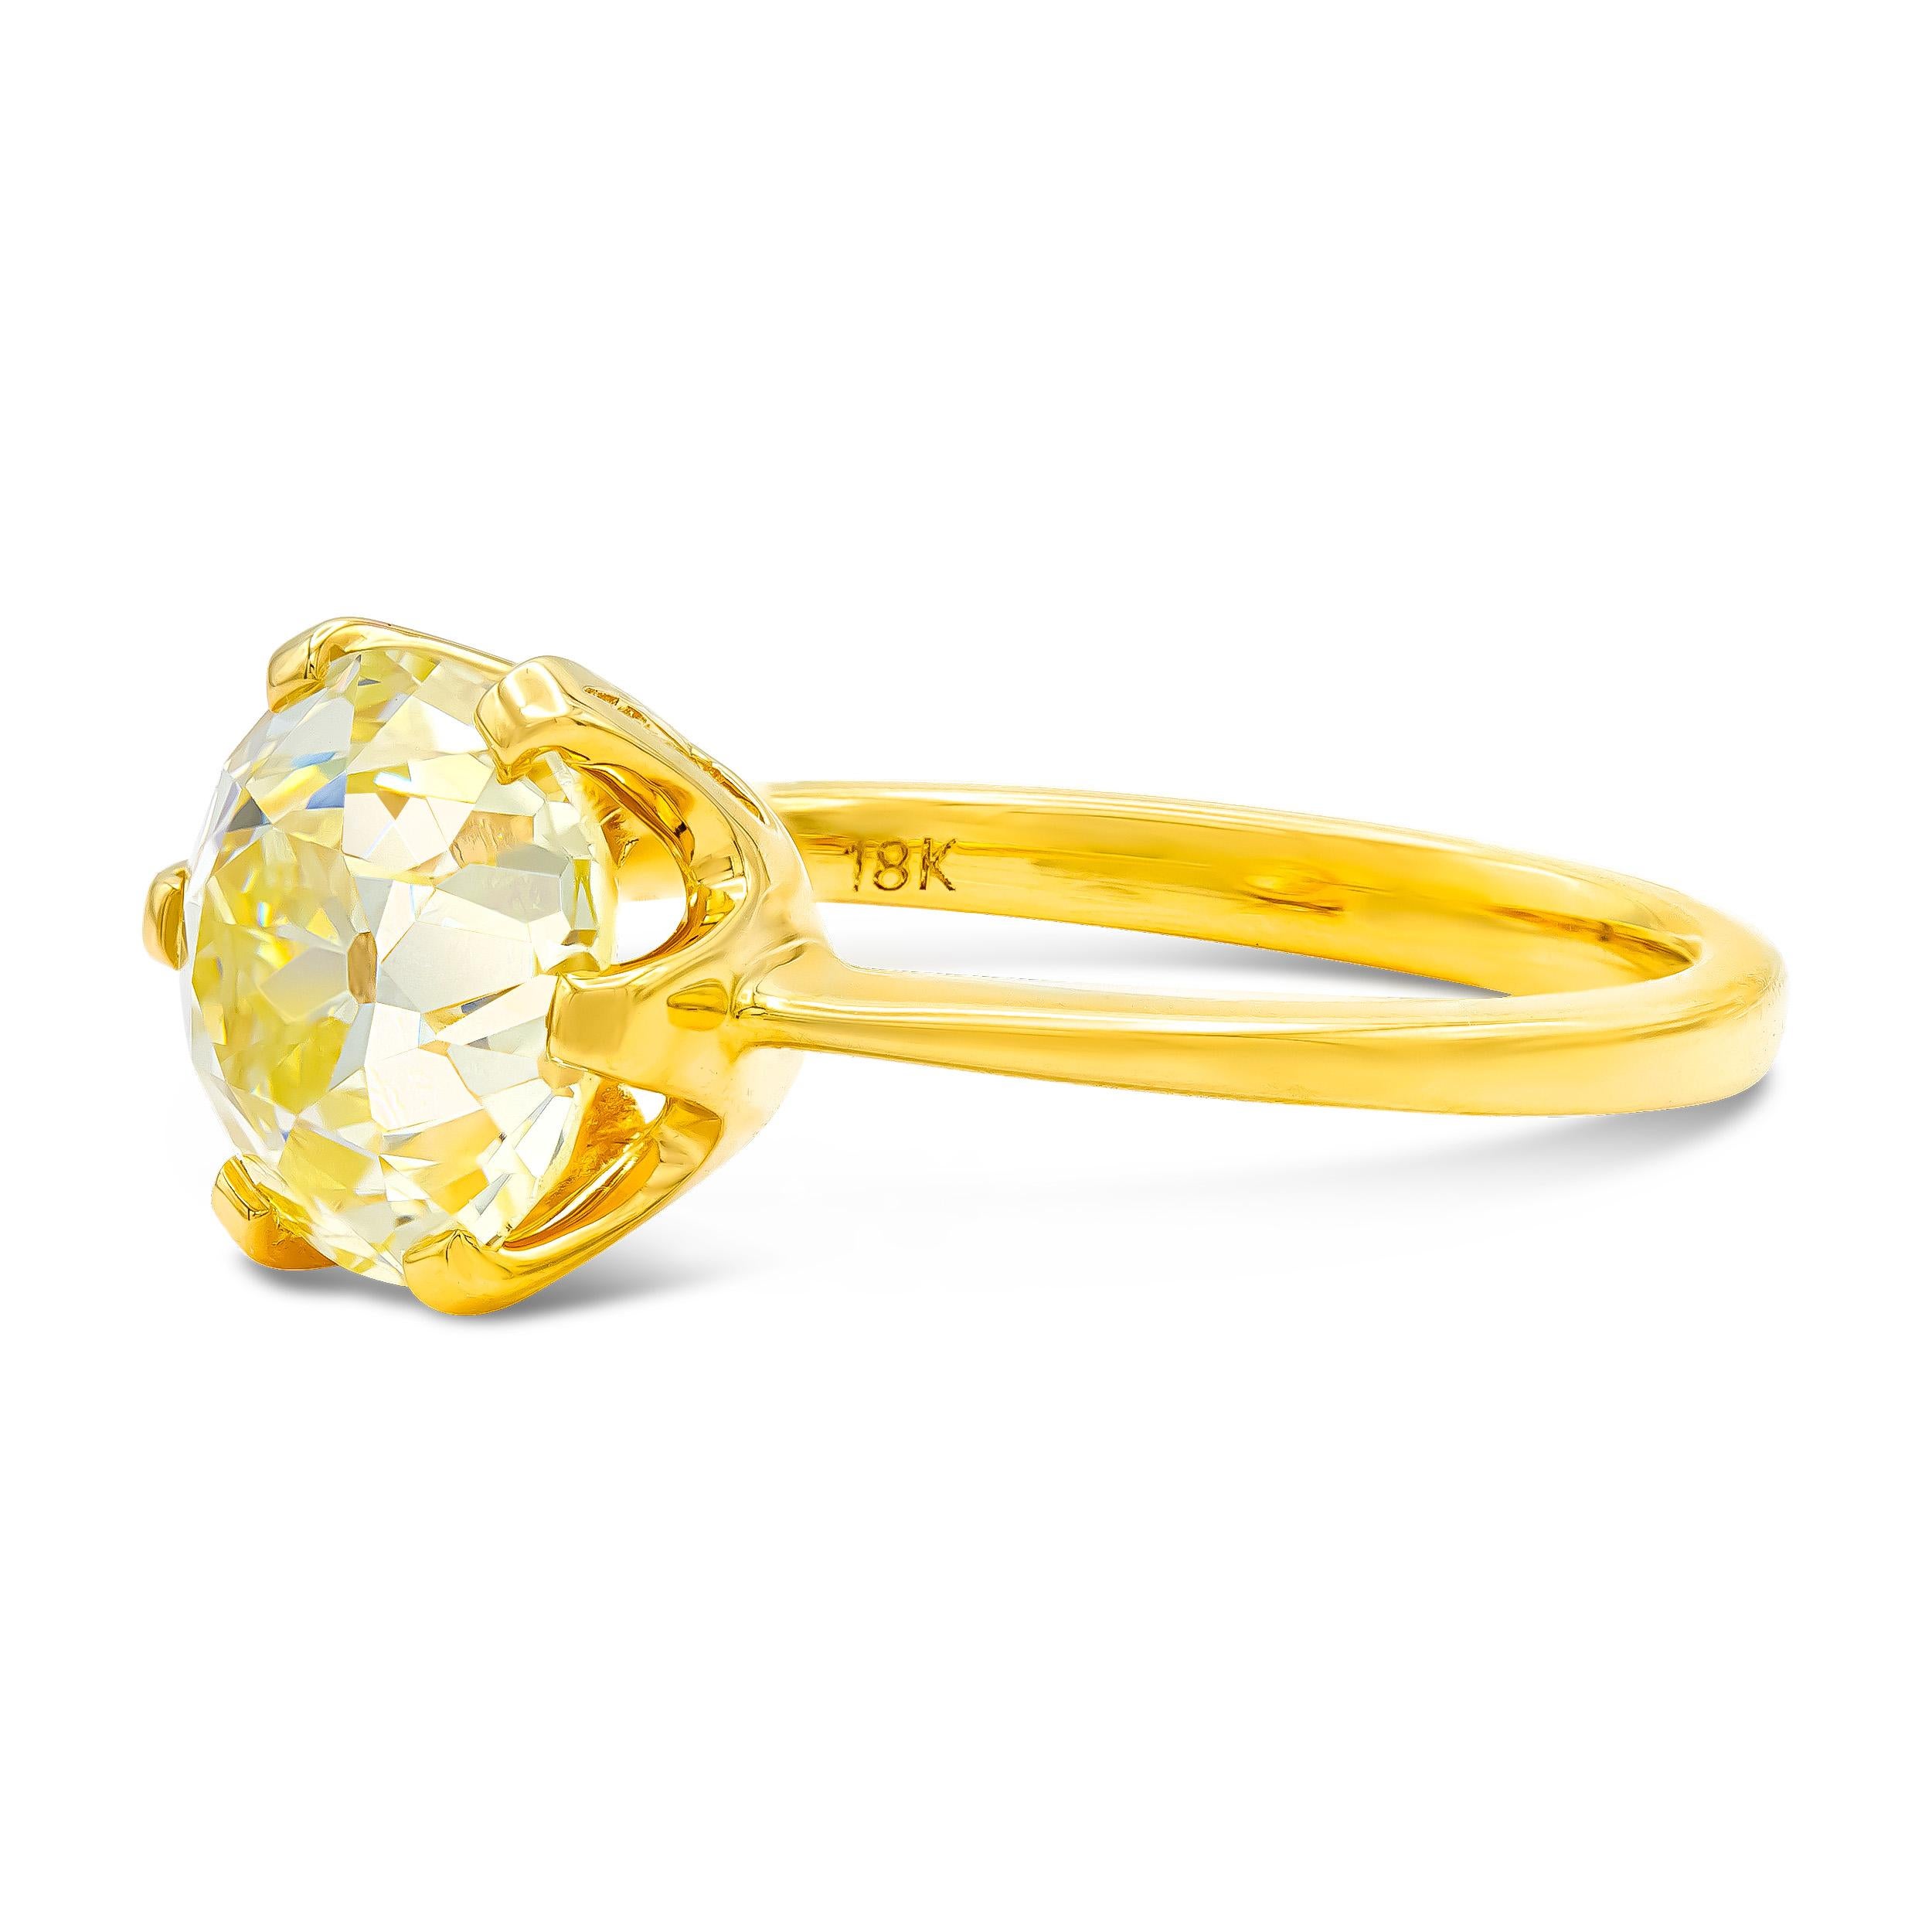 We created our Revived line for those perfectly charming antique diamonds that find us without a home and this piece is no exception. Centered with the most luscious 3.42 carat old Euro, her steep crown and visible culet steal the show. The tapered